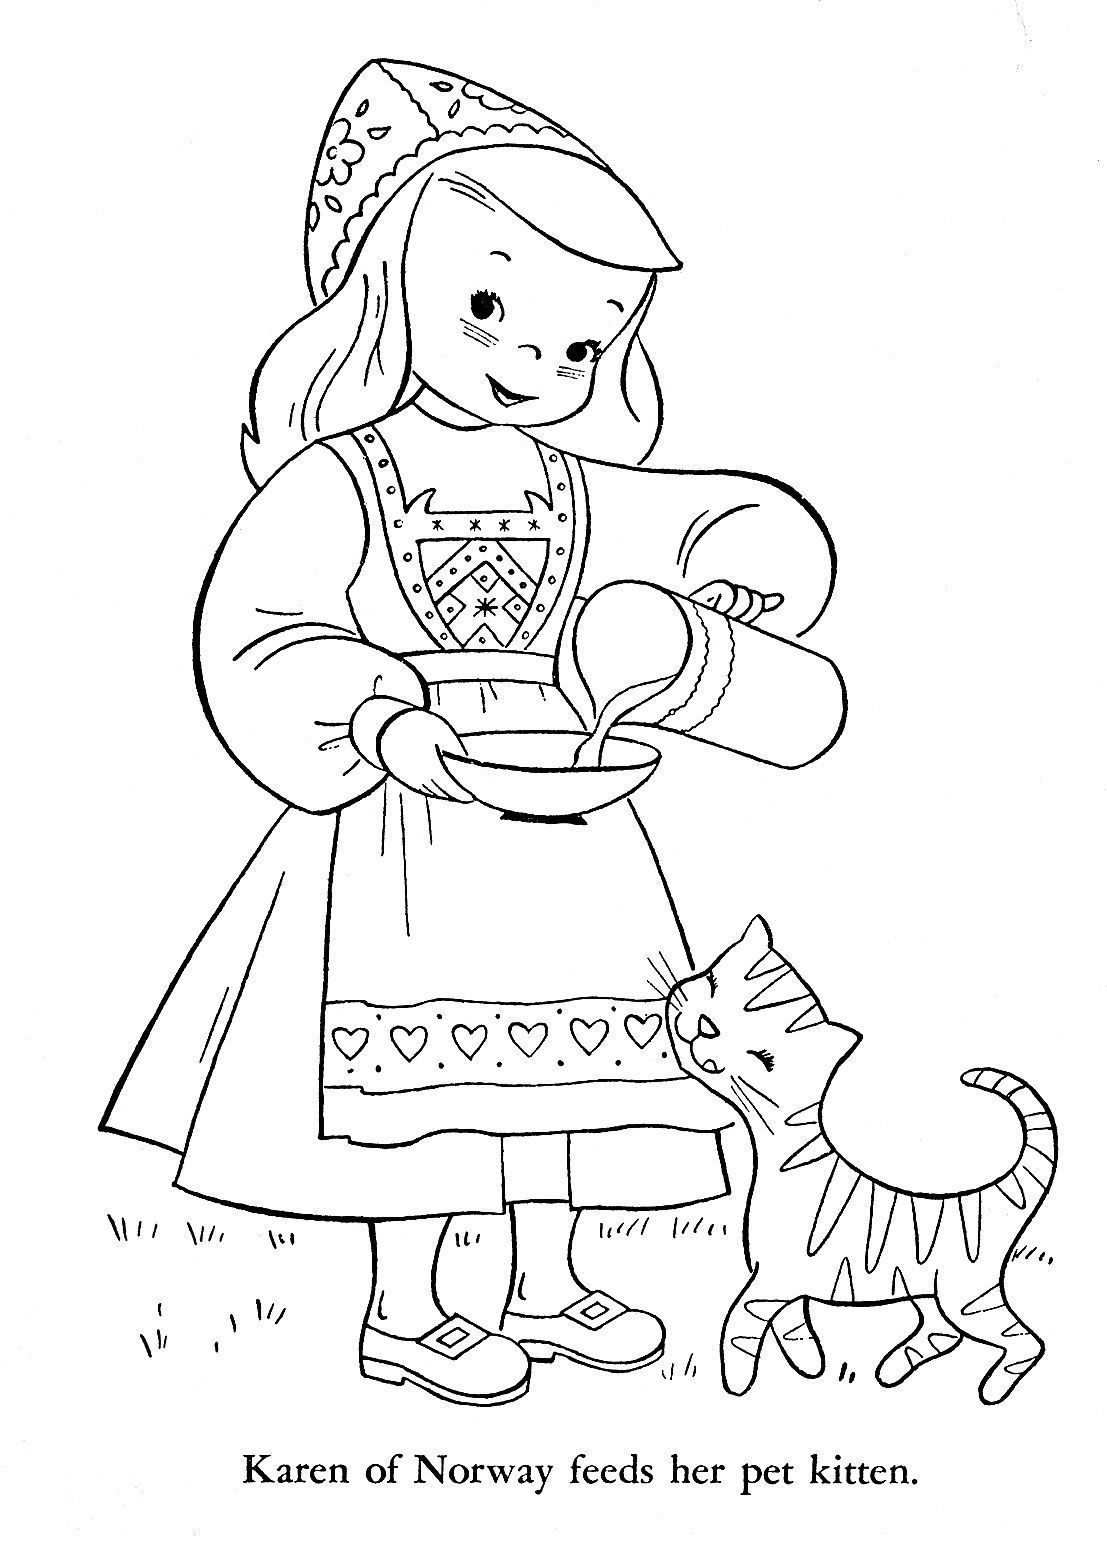 Pin by Bevish Designs on 17. may | Coloring books, Coloring pages, Norway